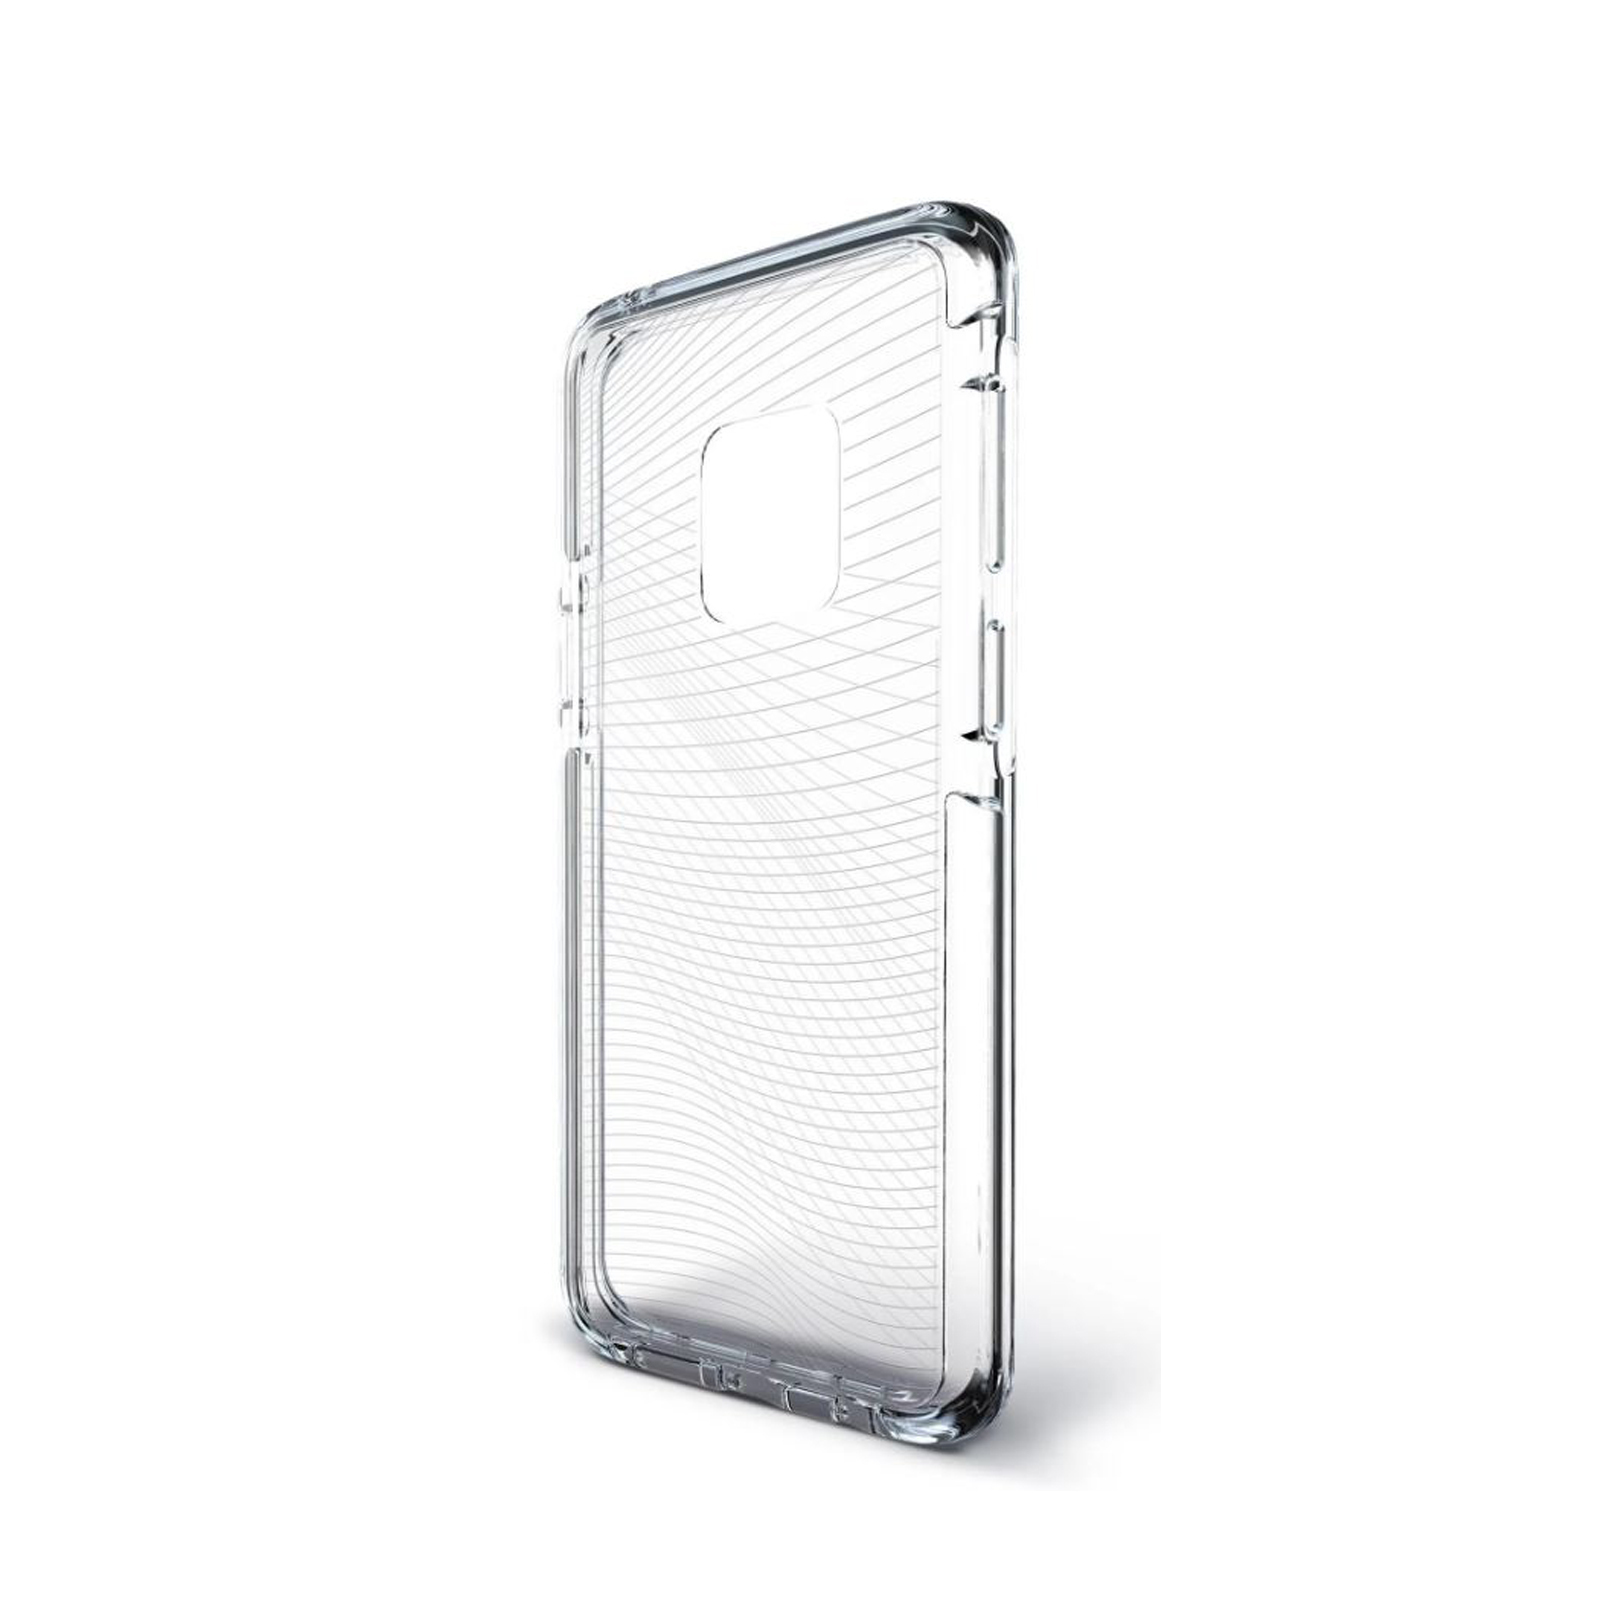 AceFly Samsung Galaxy S9 Plus Case [Clear]